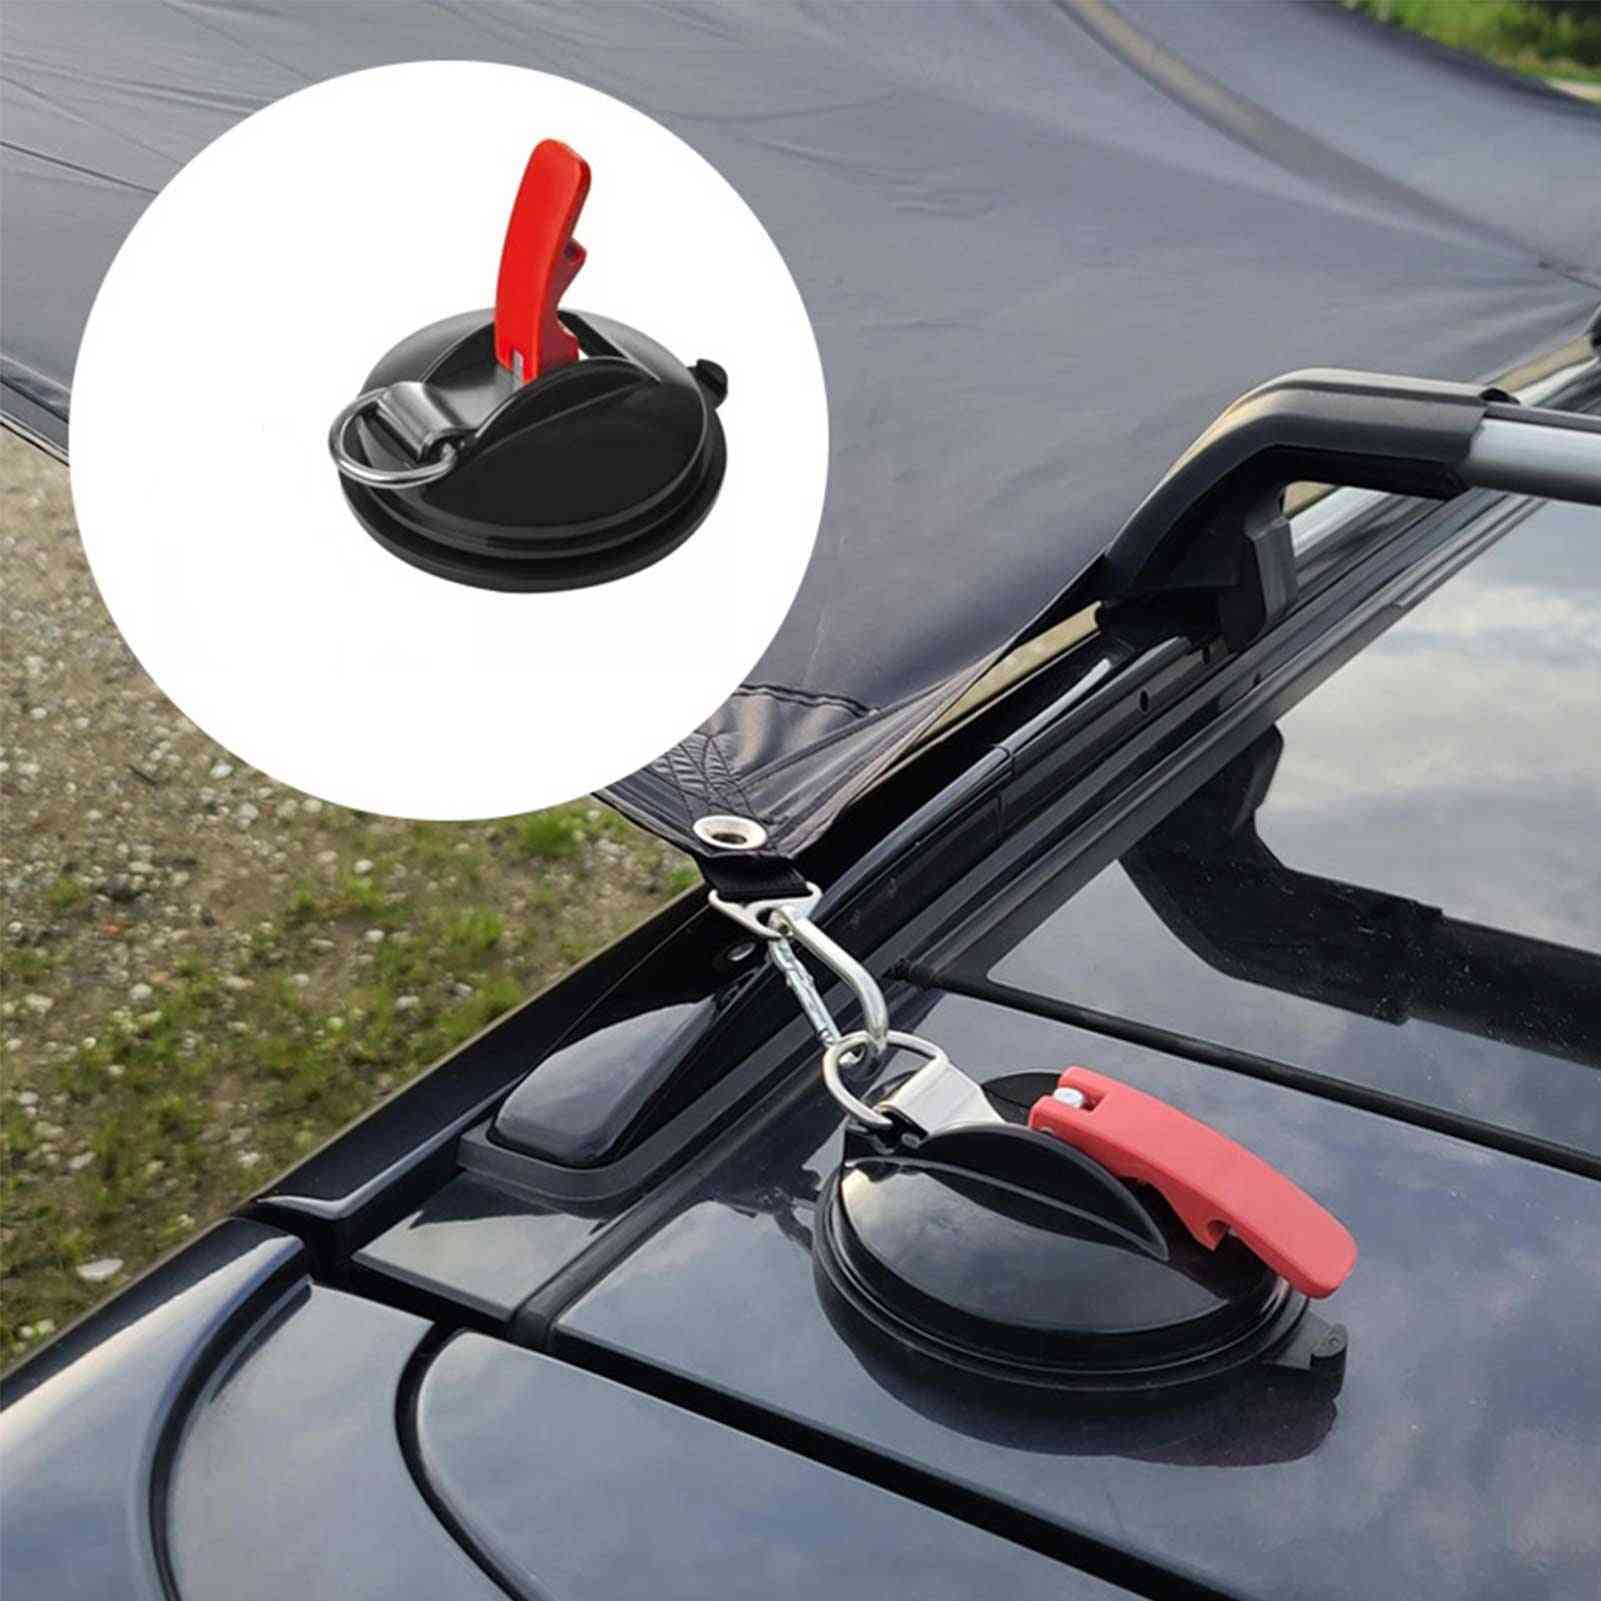 Heavy-duty & Durable Camping Tent Suction Cup Anchor